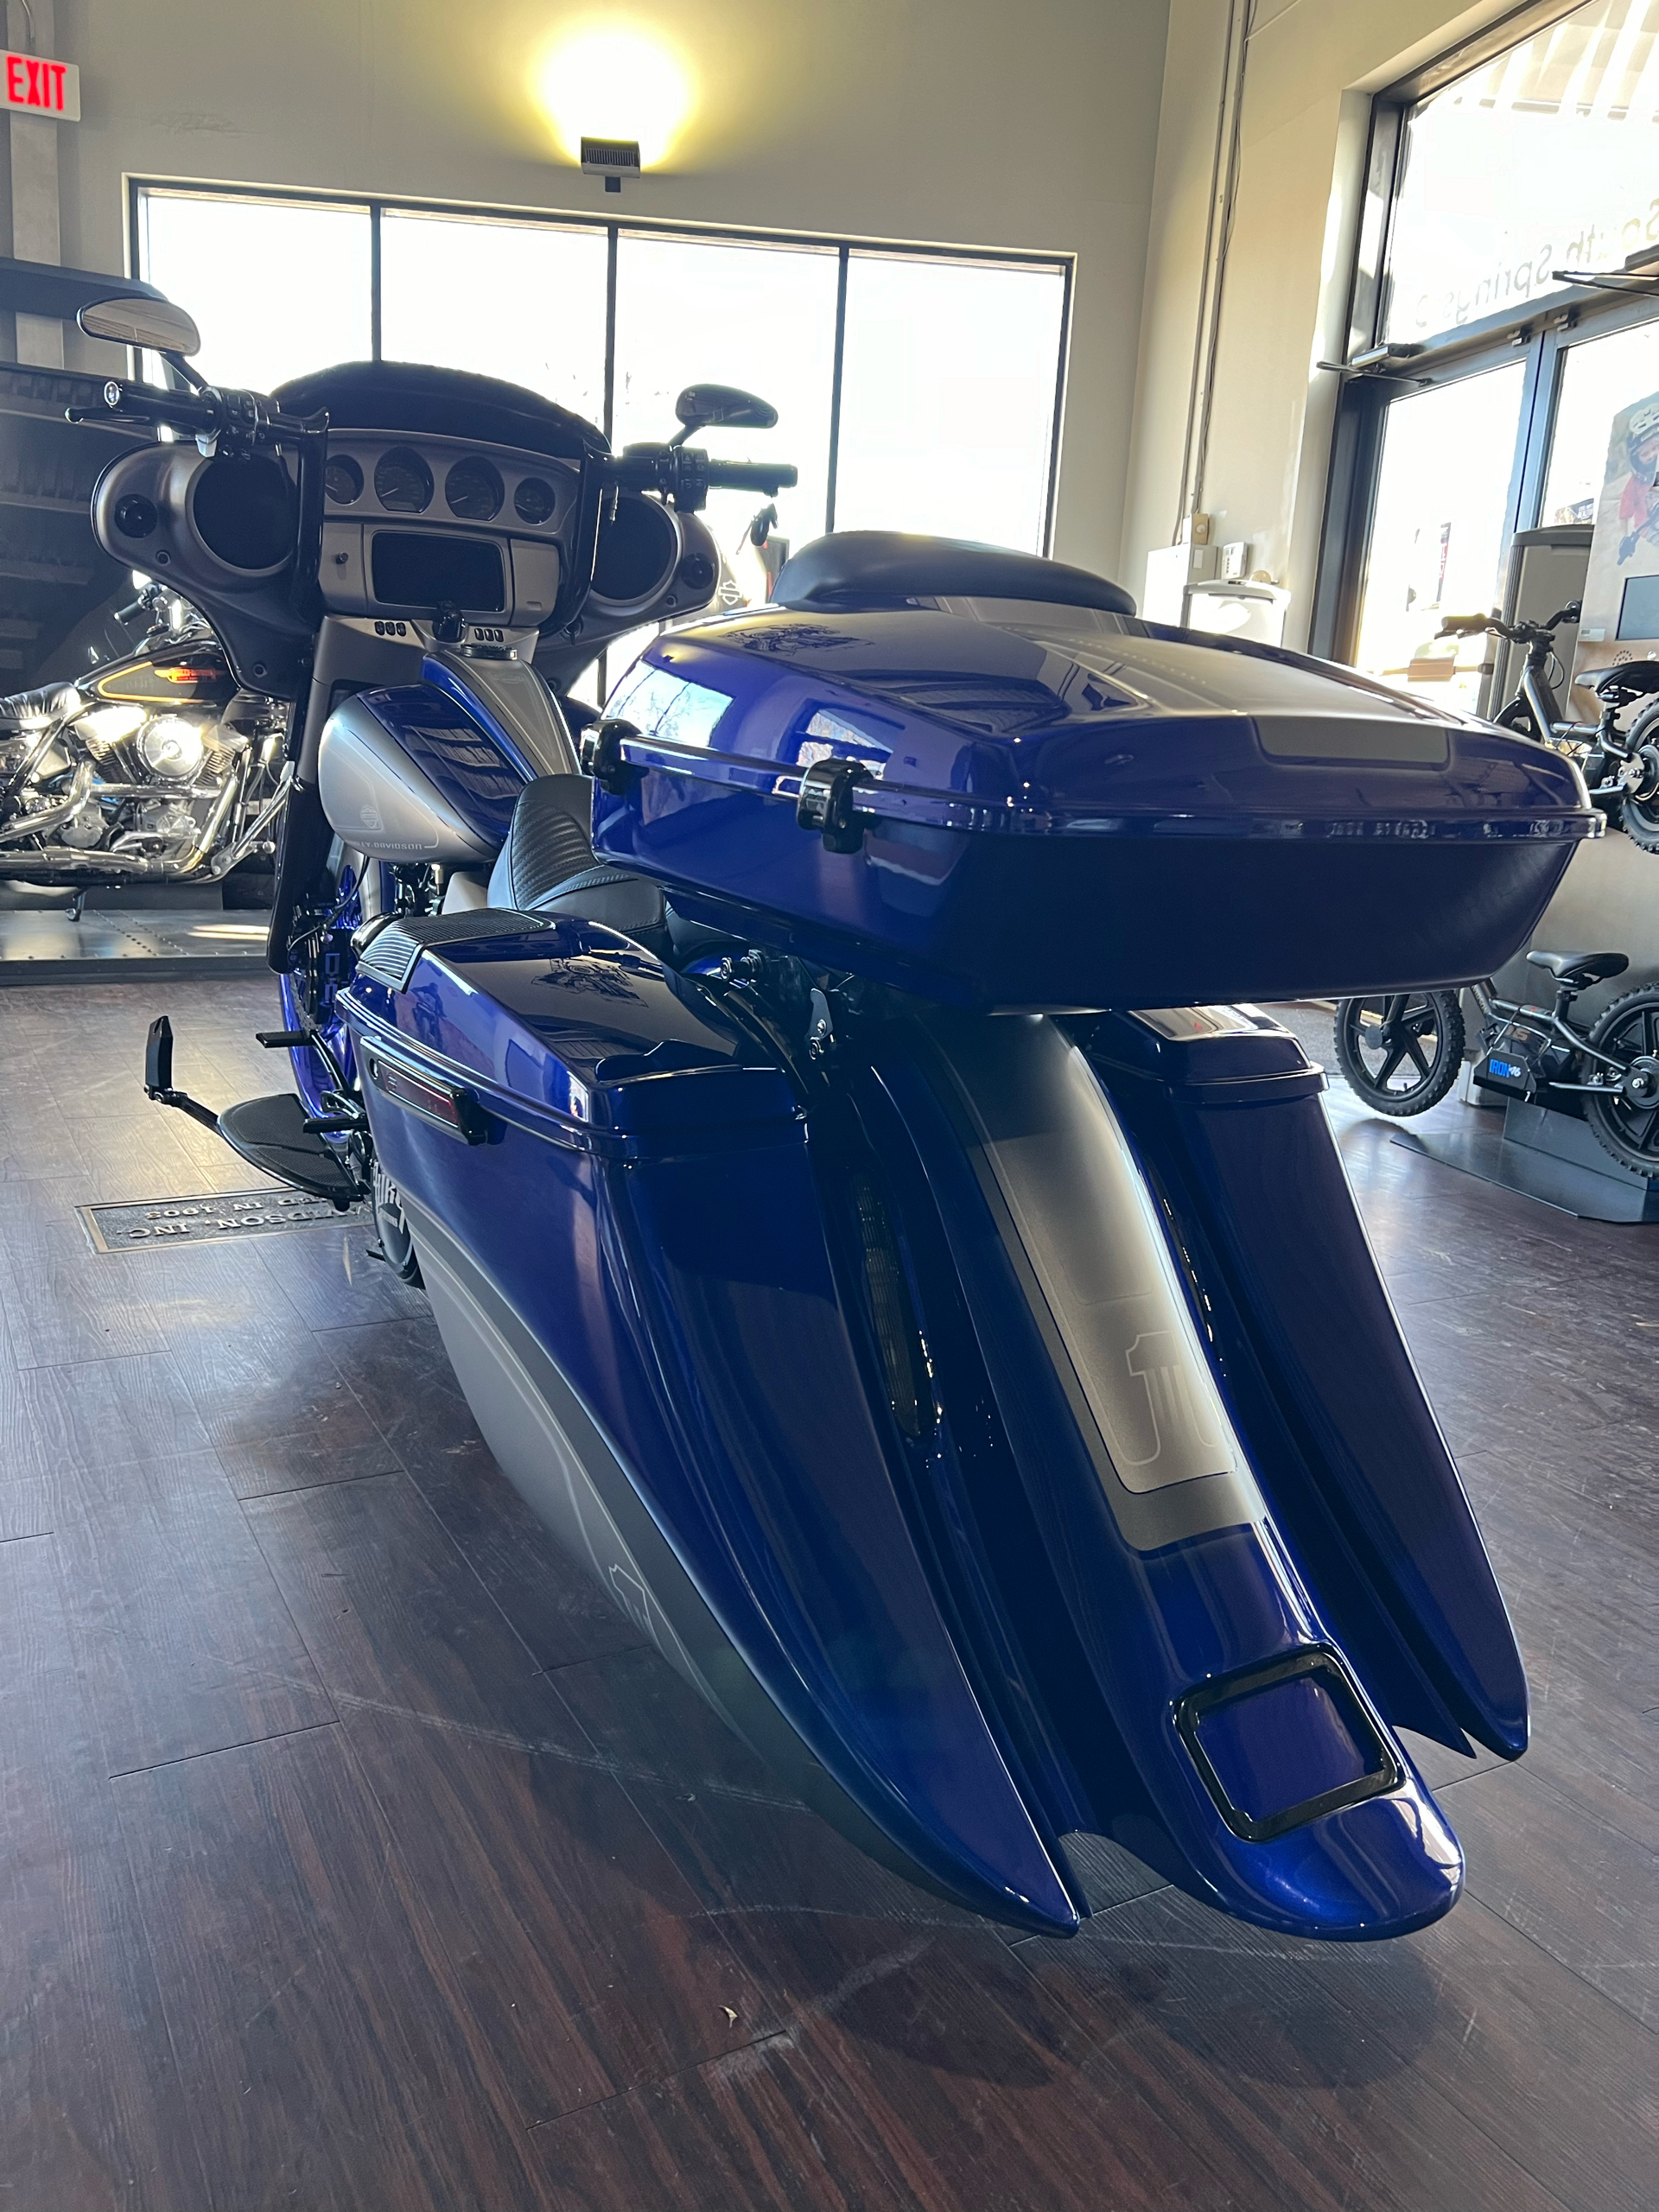 2020 Harley-Davidson Street Glide® Special in Franklin, Tennessee - Photo 16